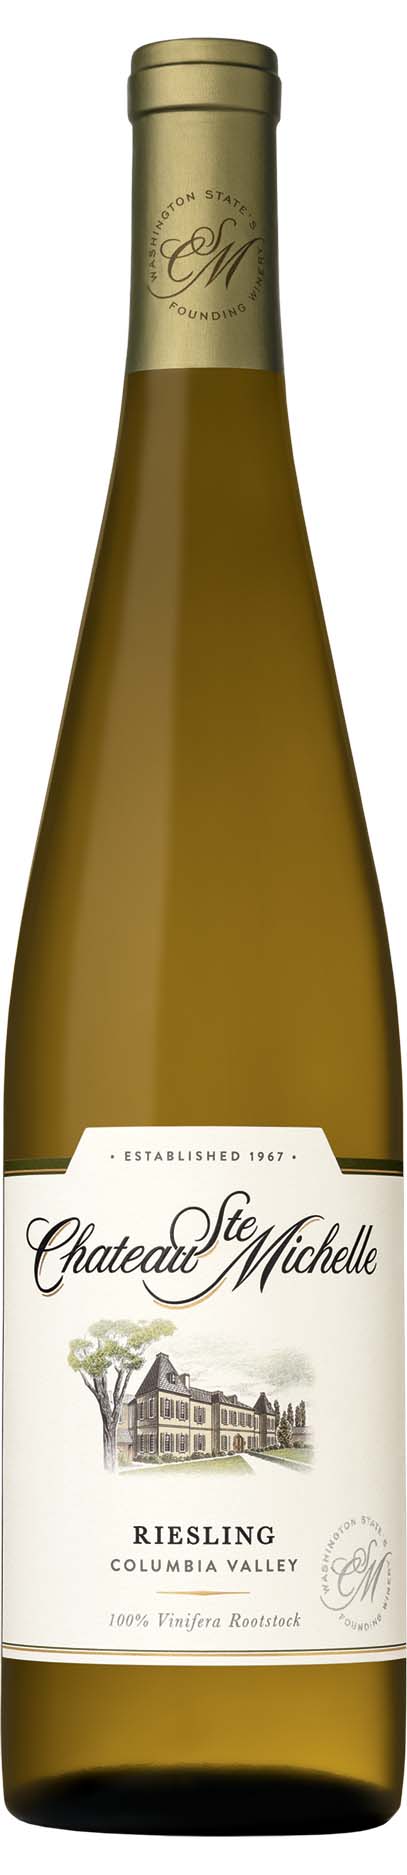 Chateau Ste. Michelle Riesling, Columbia Valley